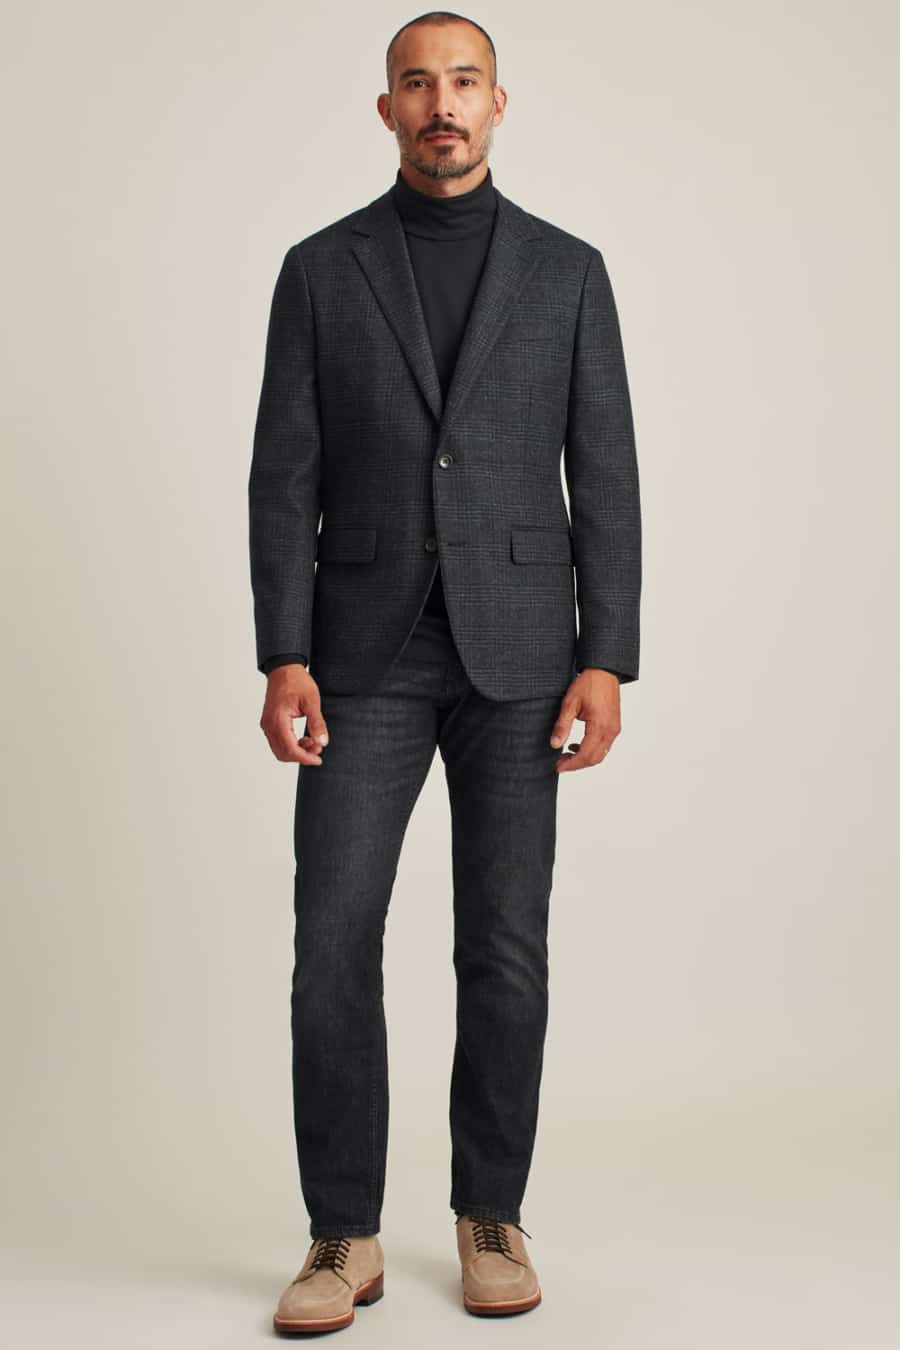 Men's black-grey jeans, charcoal roll neck, charcoal blazer and beige suede shoes outfit